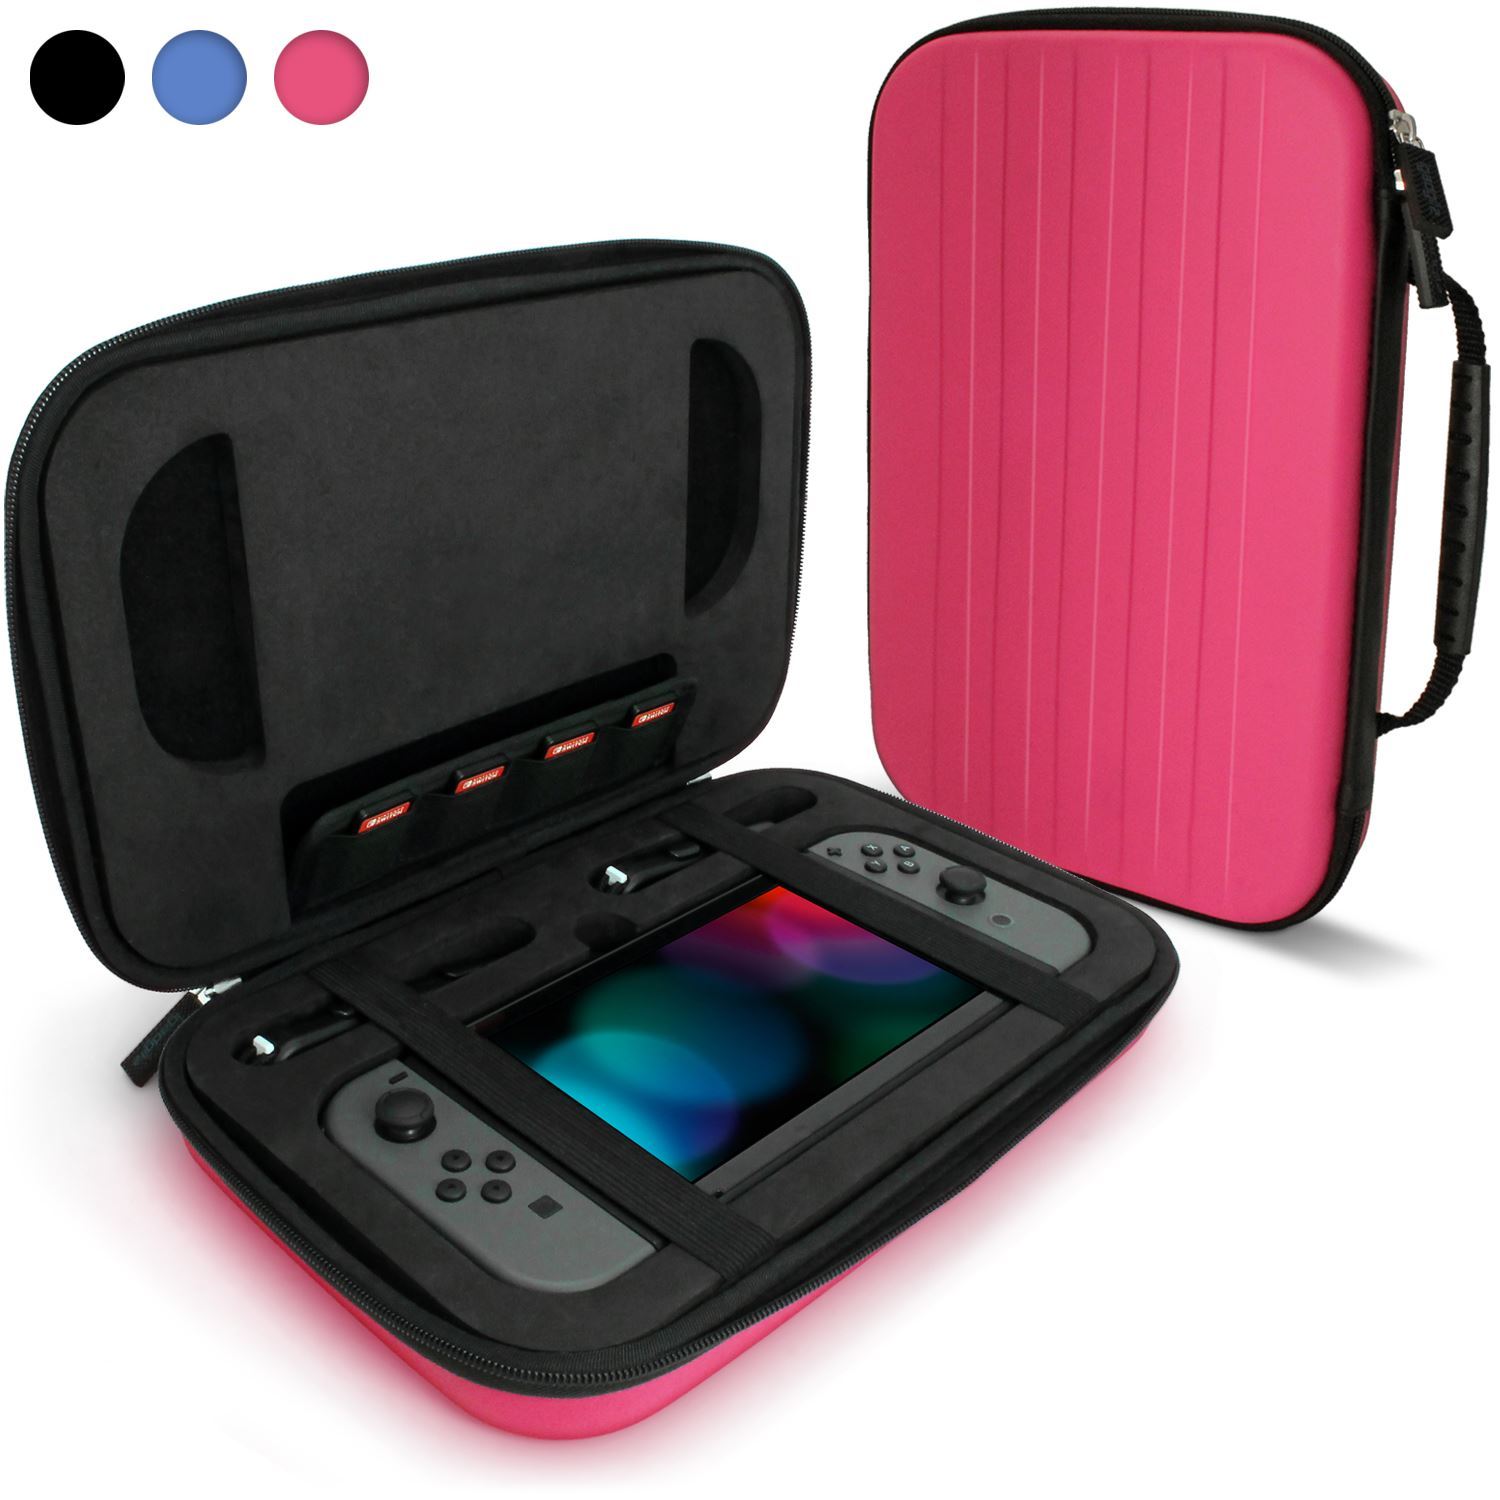 EVA Hard Travel Case for Nintendo Switch Cover with Shockproof Foam Inner & Carrying Handle Featured Image